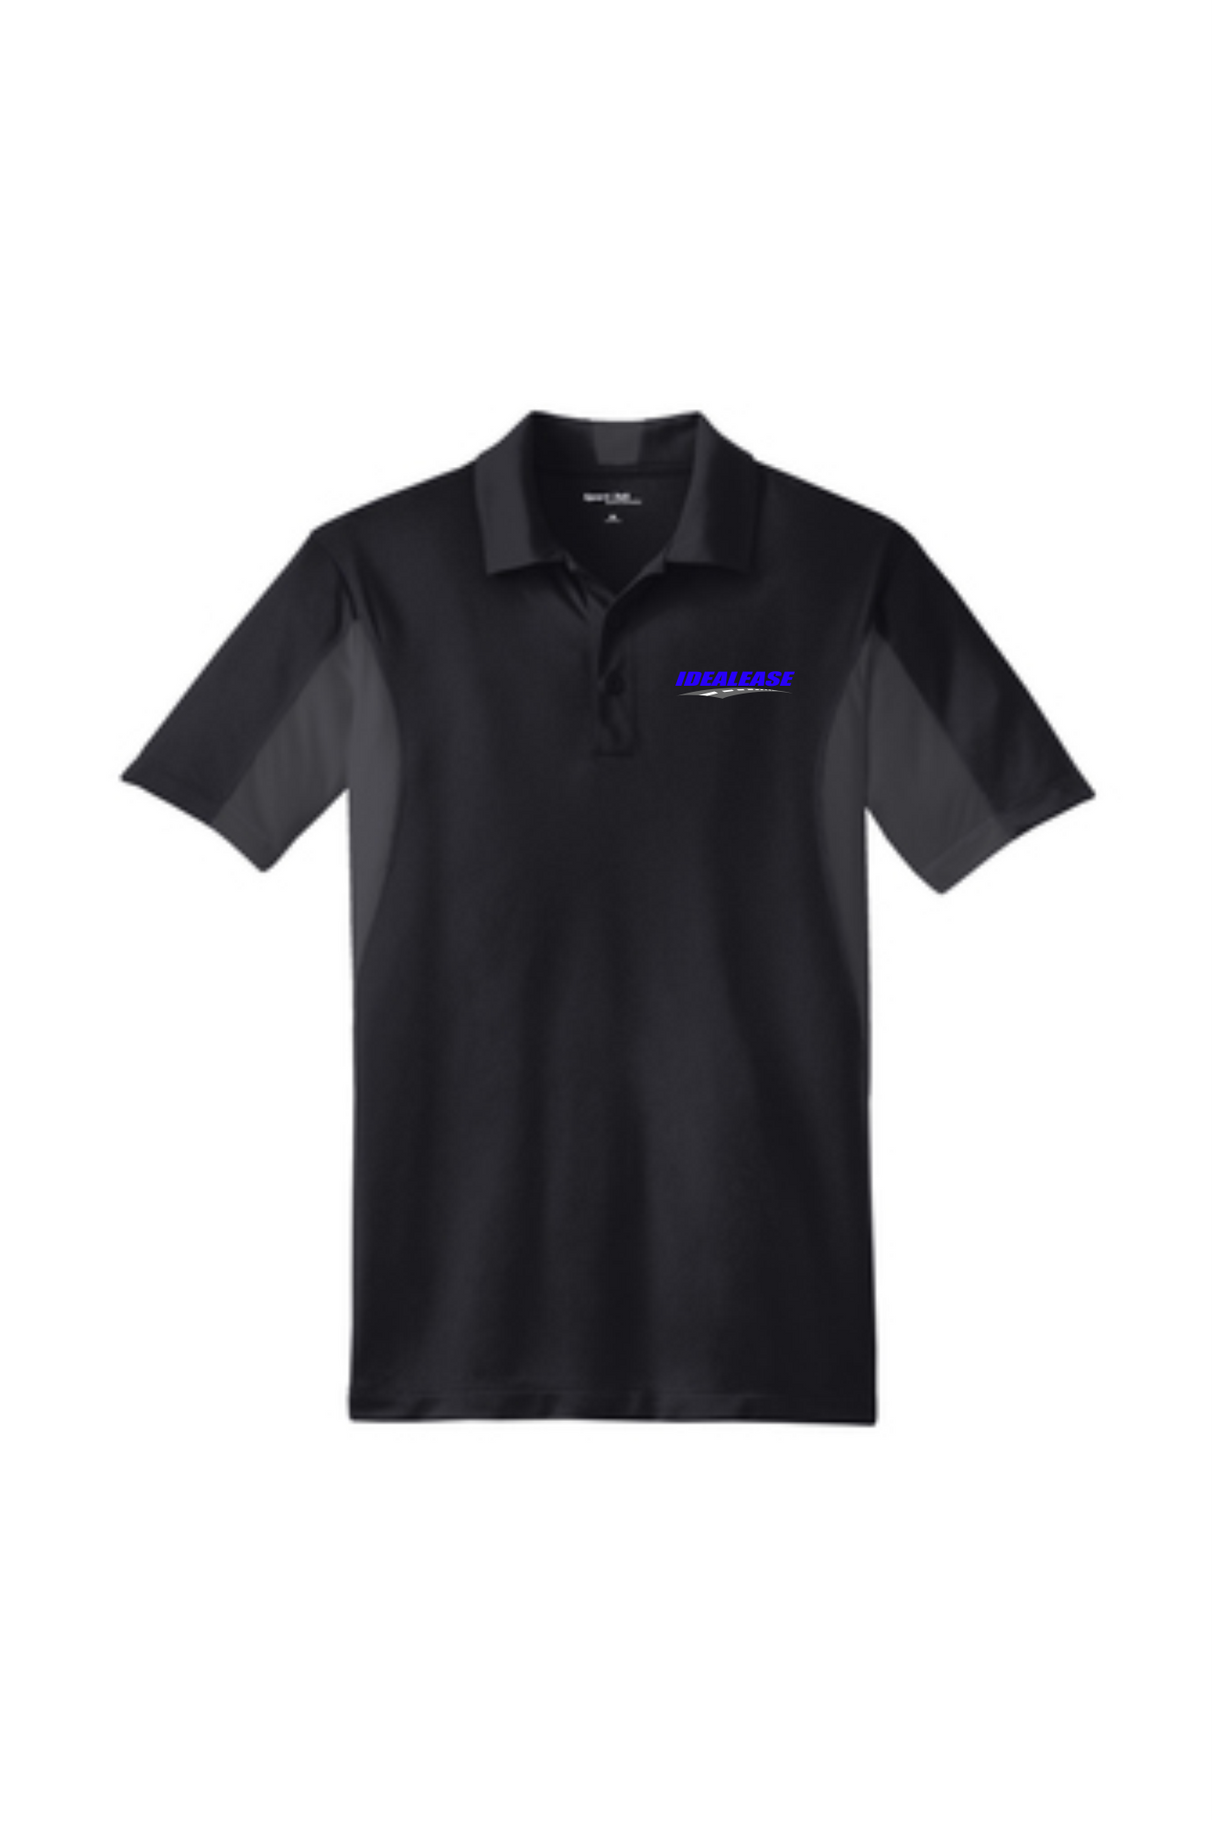 Idealease Official Uniform Side Blocked Micropique Performance Polo